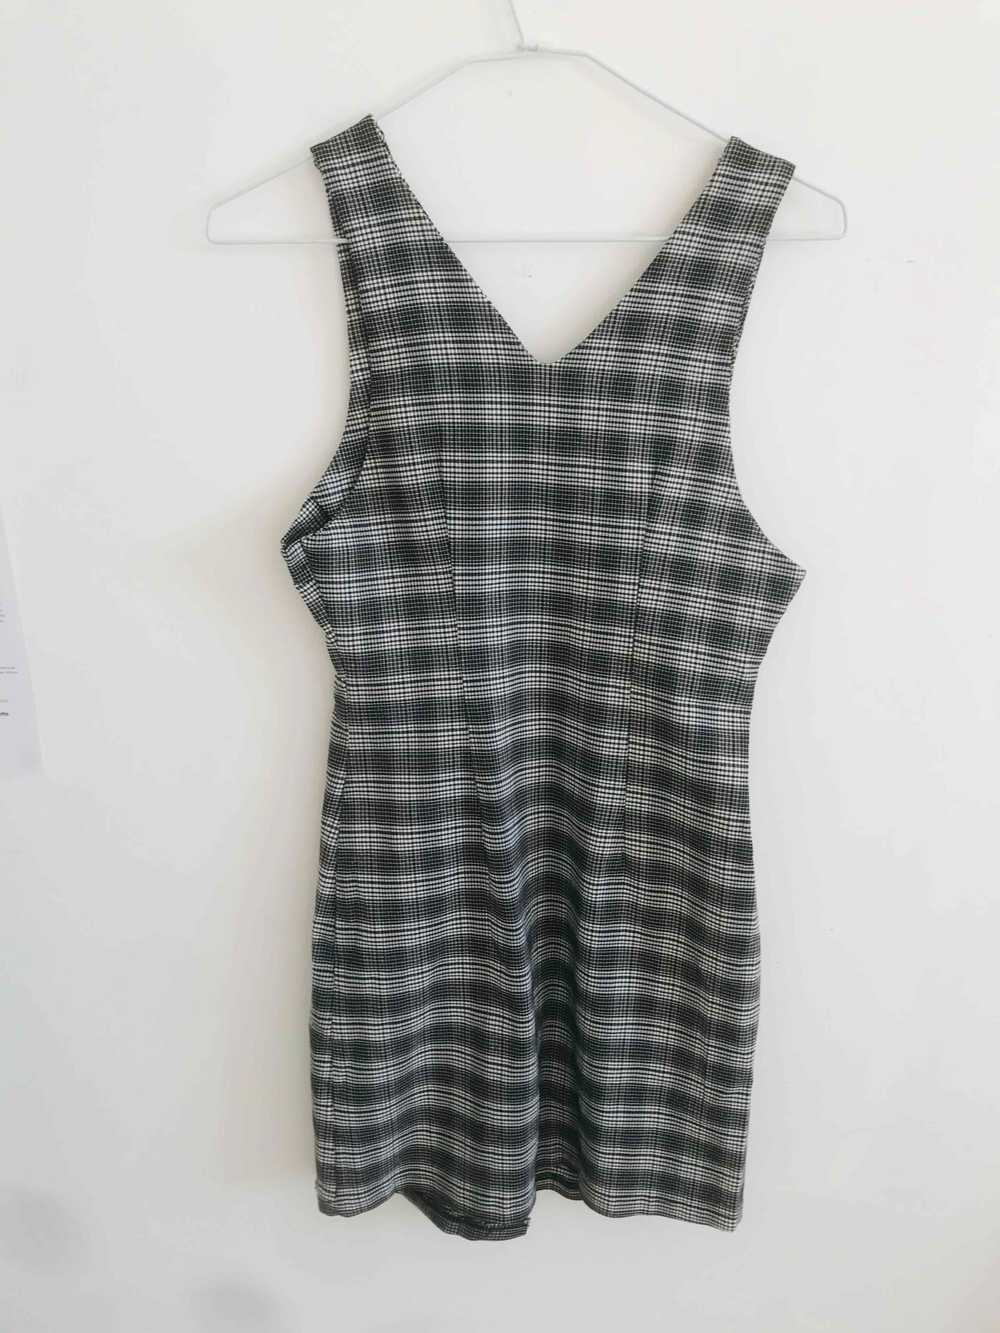 Buttoned dress - Checked mini dress - image 4